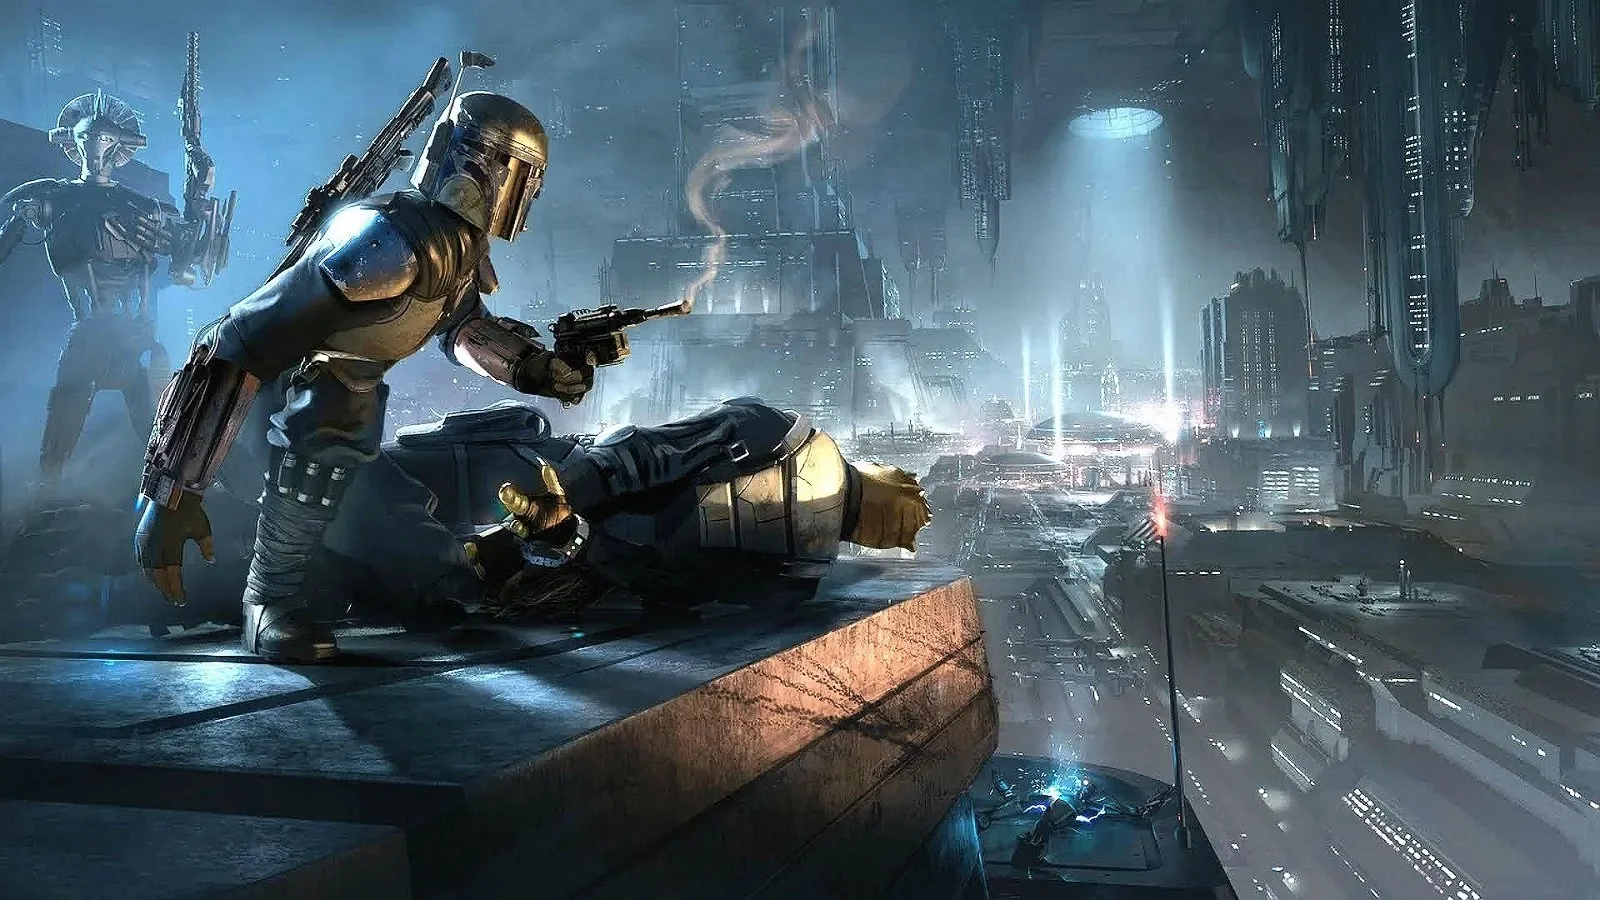 Rumors: Titanfall creators are developing a game about The Mandalorian